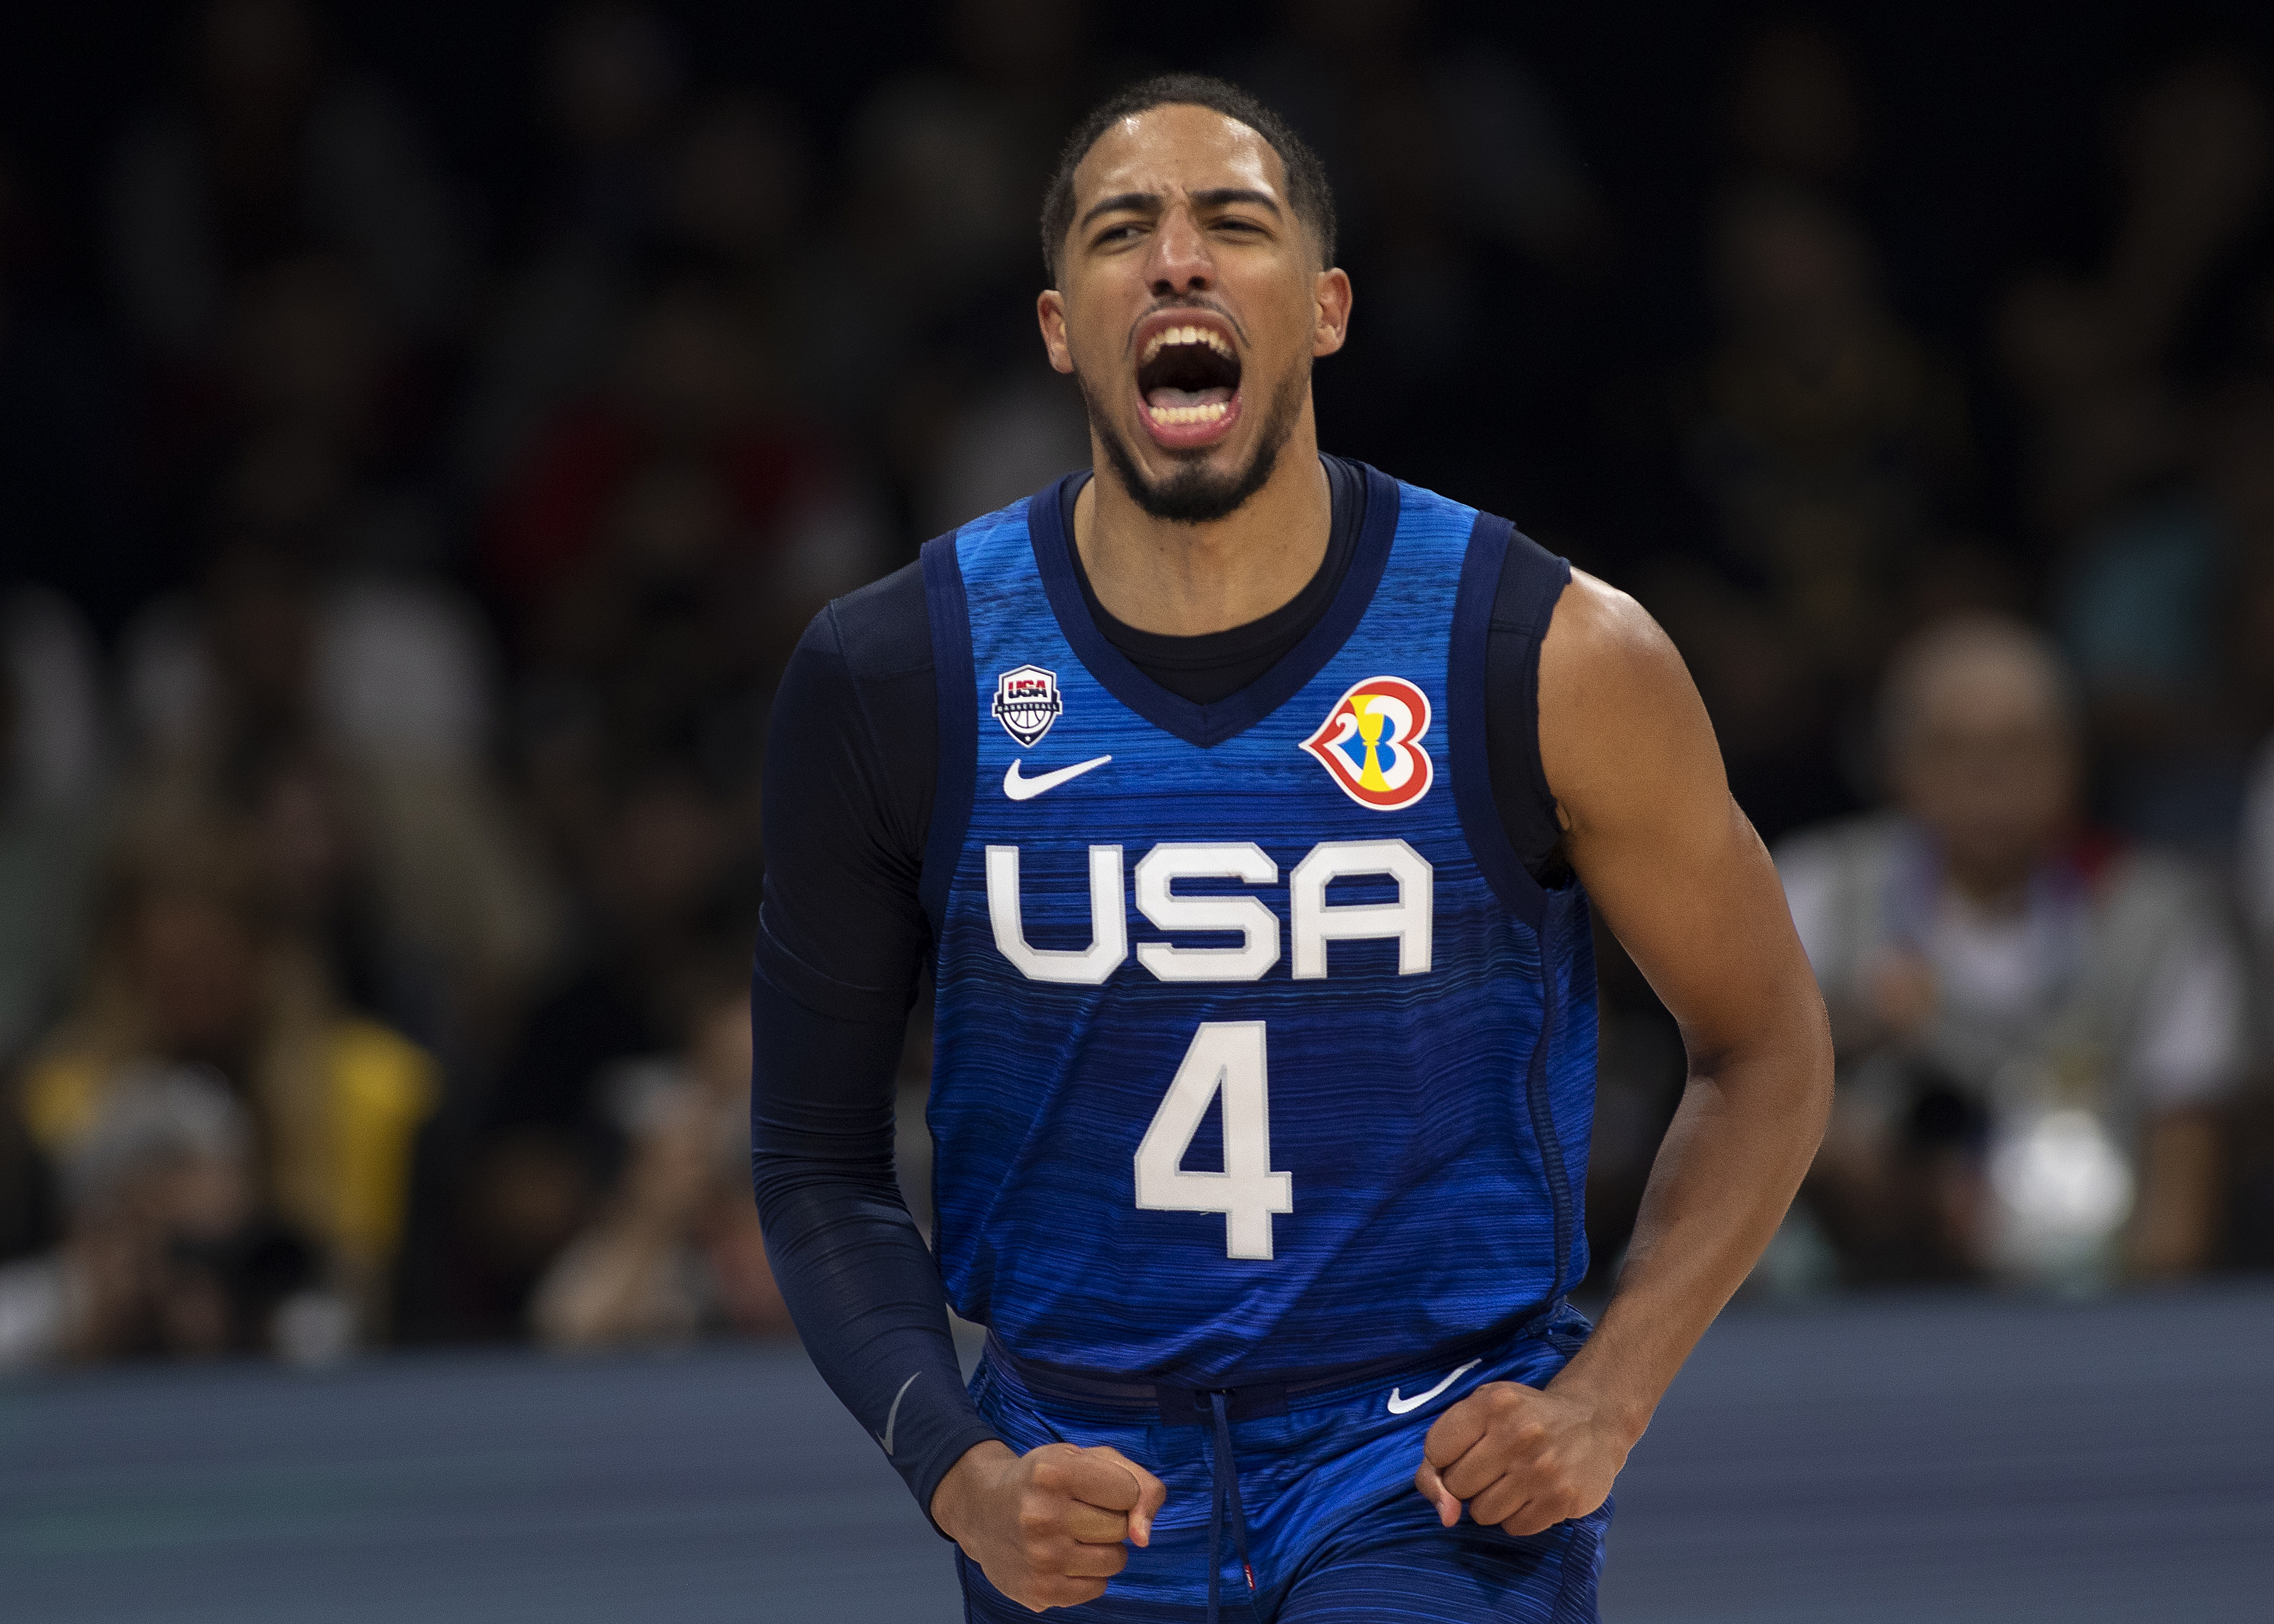 MANILA, PHILIPPINES - SEPTEMBER 5: Tyrese Haliburton of U.S. celebrates during the FIBA Basketball World Cup quarter-final game between Italy and U.S. at Mall of Asia Arena on September 5, 2023 in Manila, Philippines.